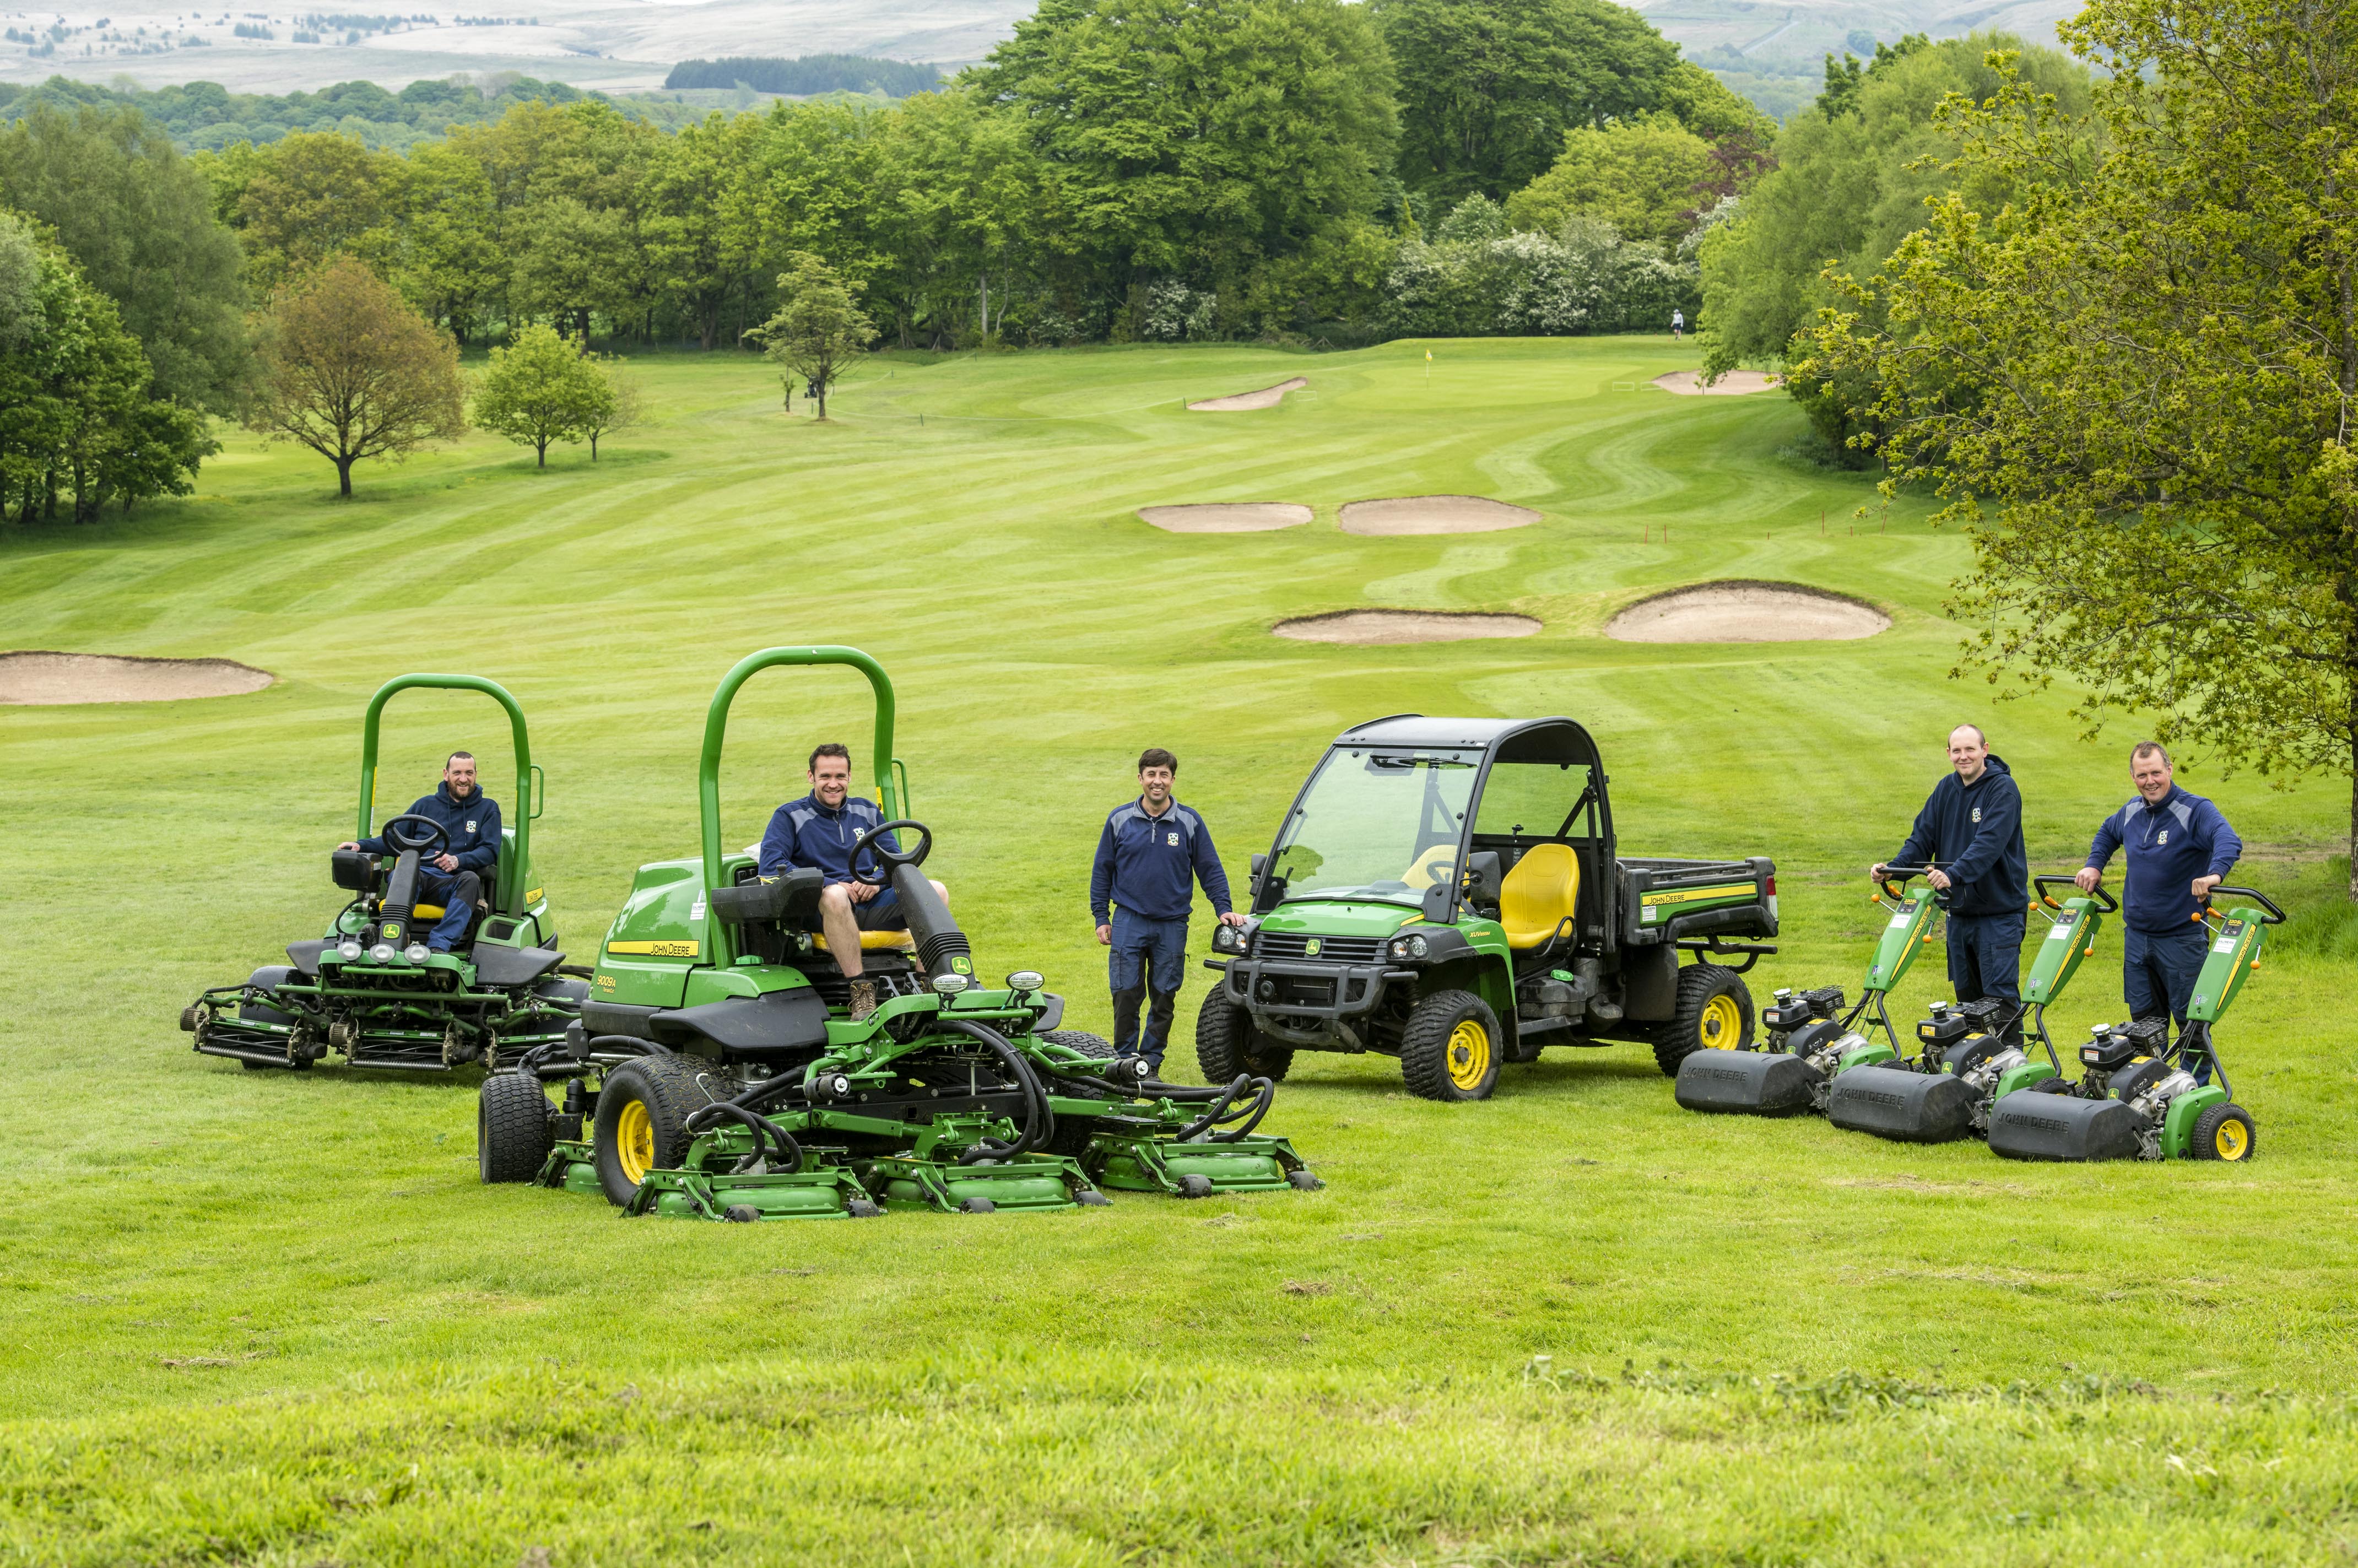 Members of the greenkeeping team at Chorley display the new John Deere machinery they are now using. 